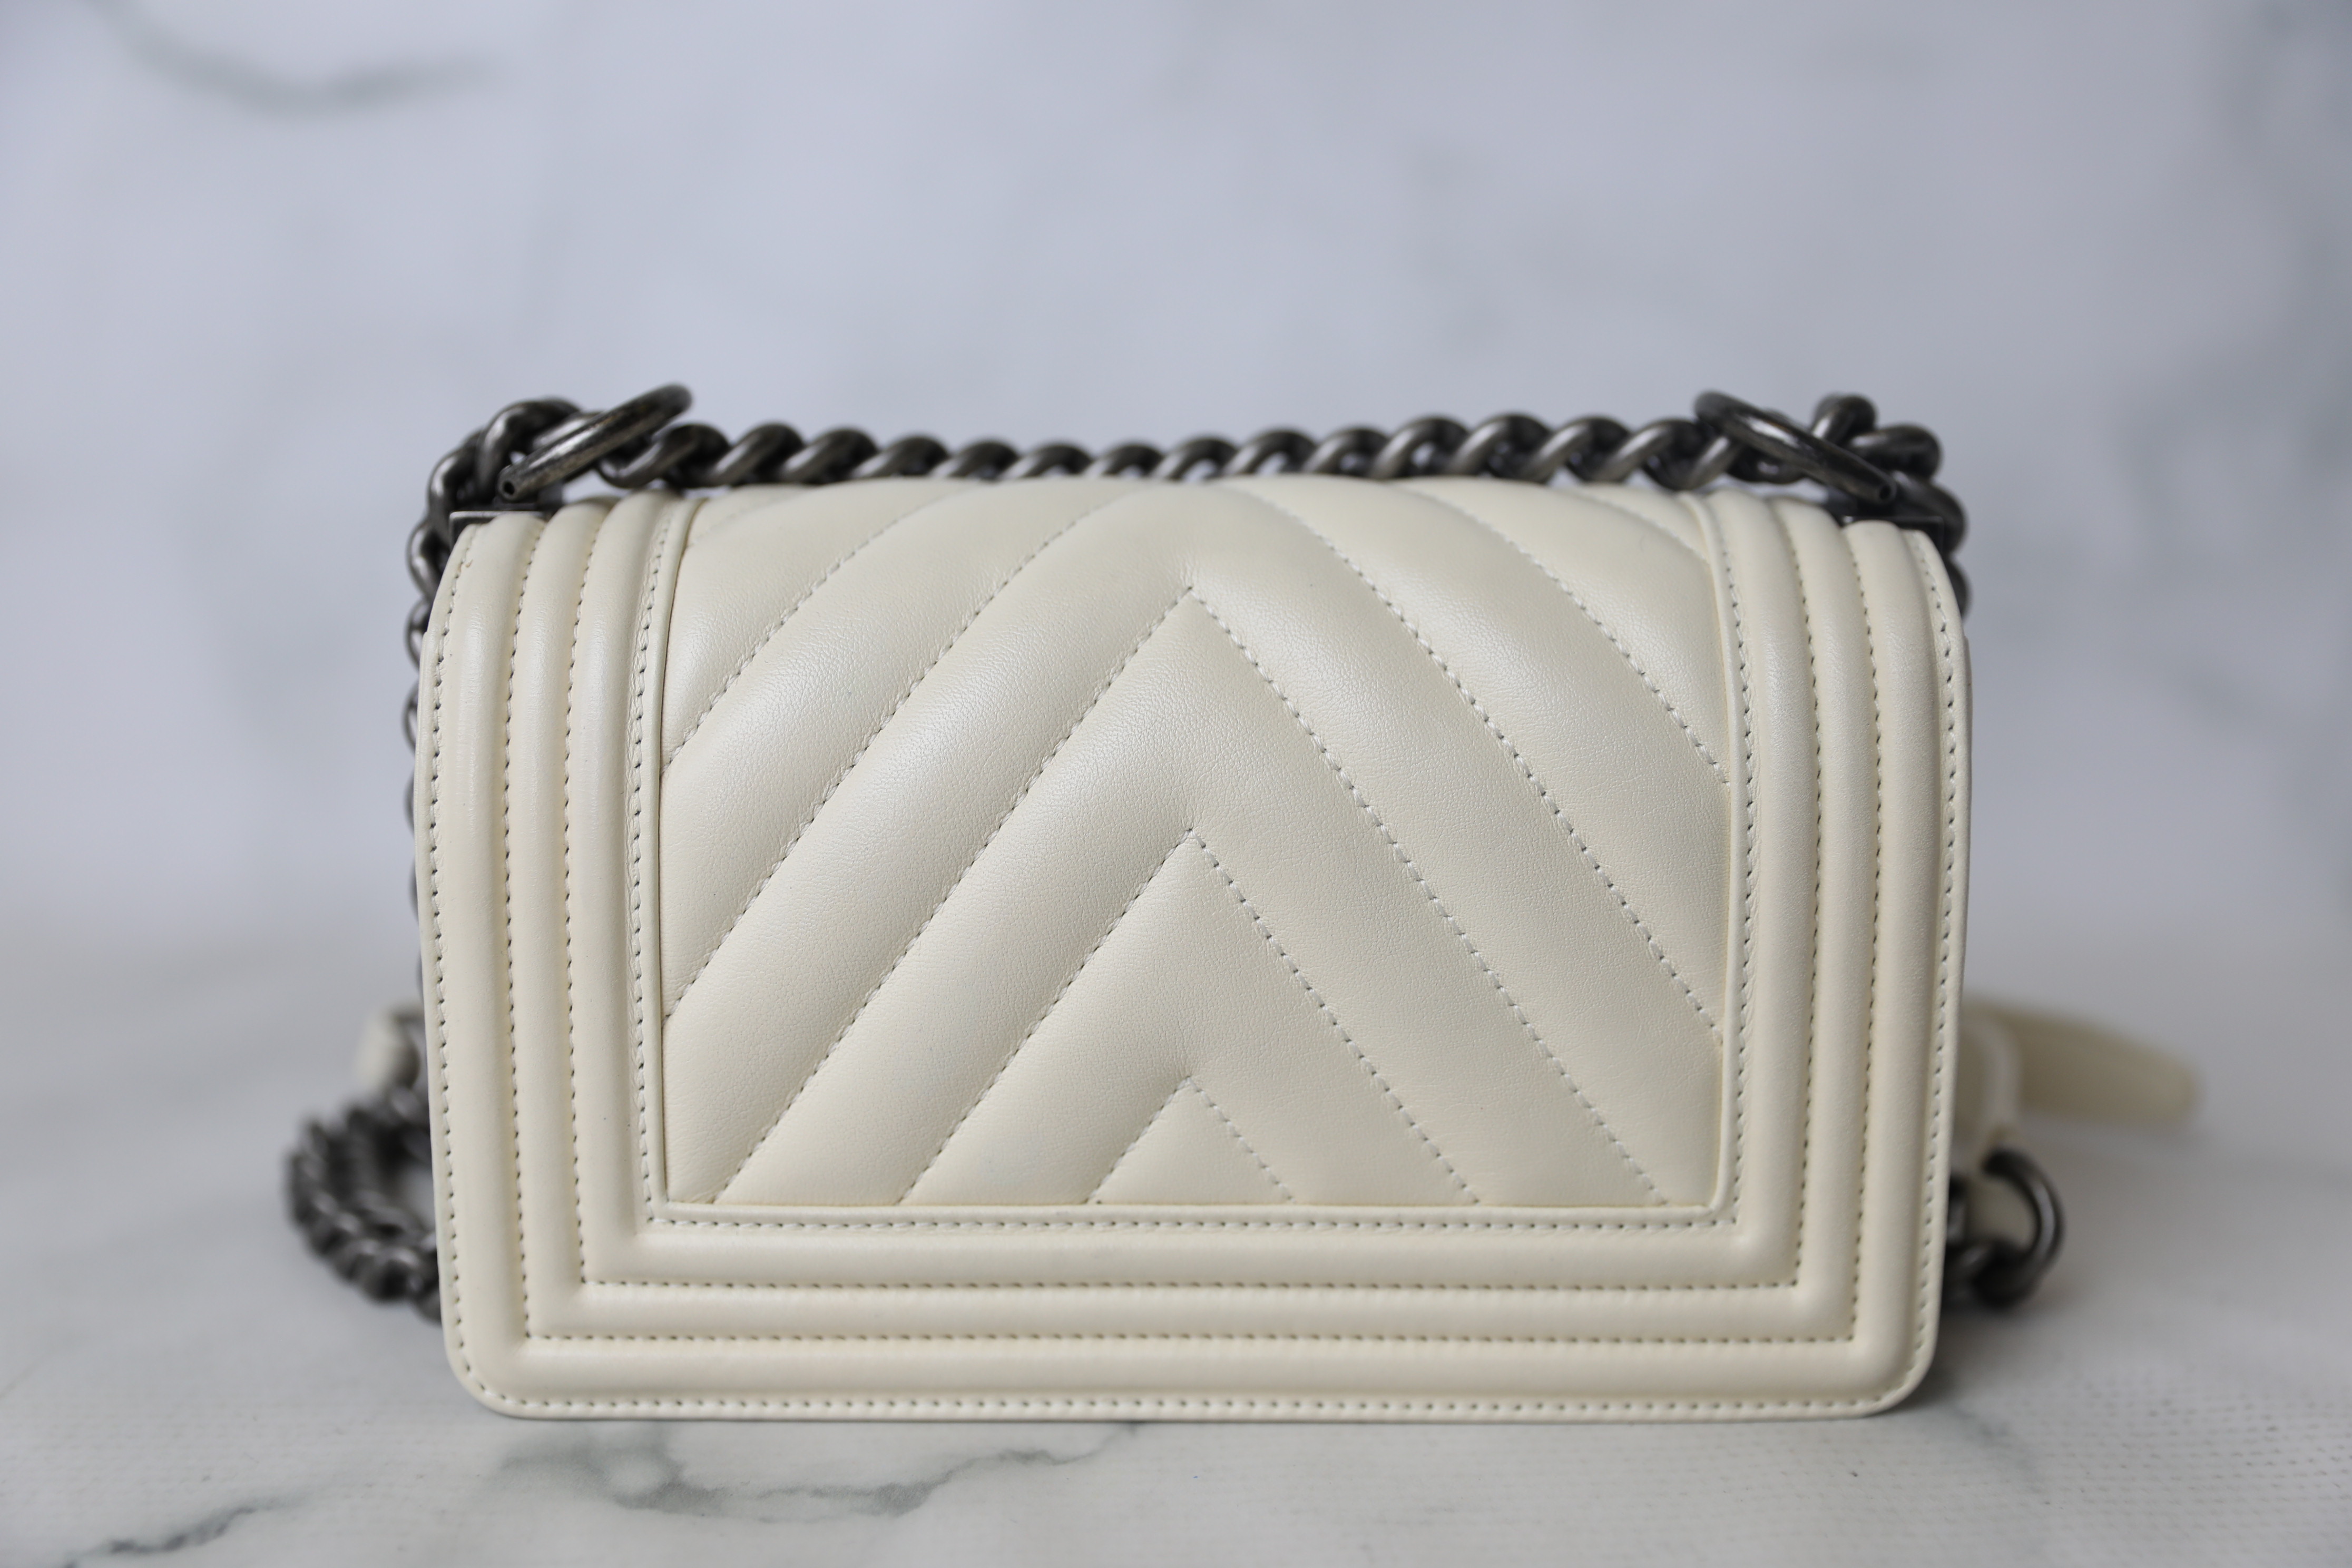 Chanel Boy Small, White Calfskin with Ruthenium Hardware